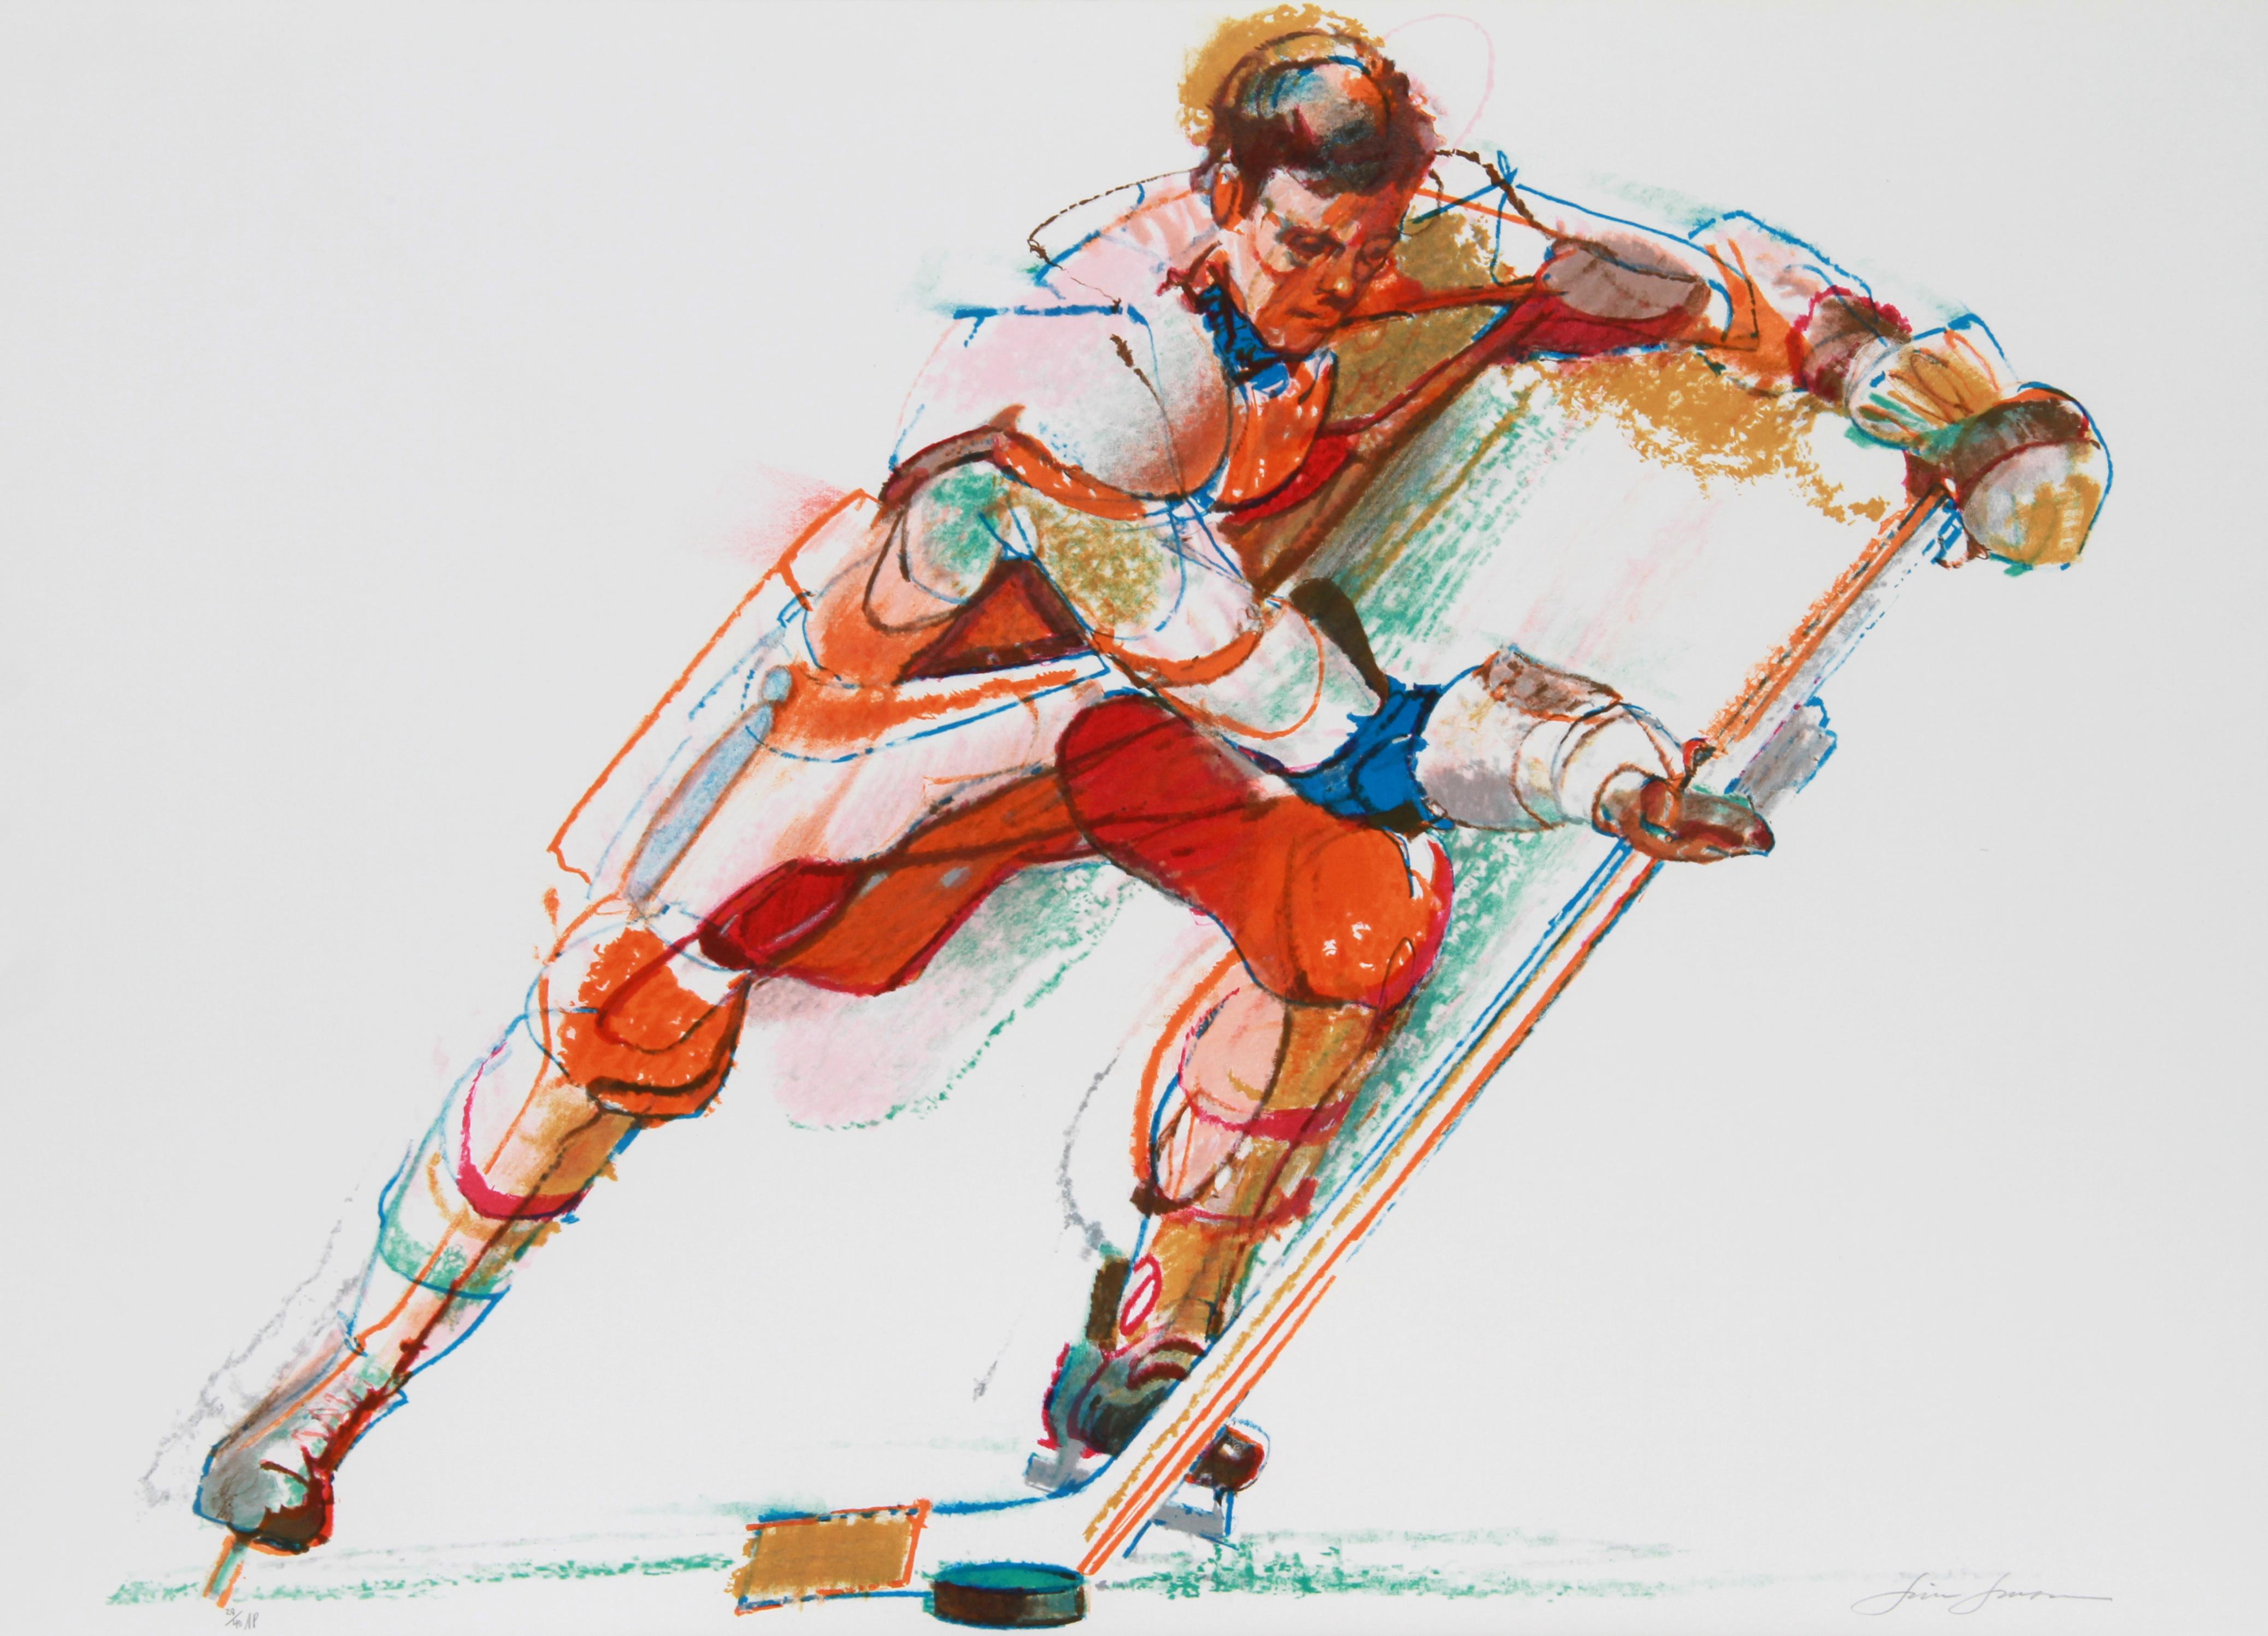 Hockey
Jim Jonson, American (1928–1999)
Date: circa 1980
Lithograph, signed and numbered in pencil
Edition of 300, AP 40
Image Size: 22 x 28 inches
Size: 22 in. x 30.5 in. (55.88 cm x 77.47 cm)